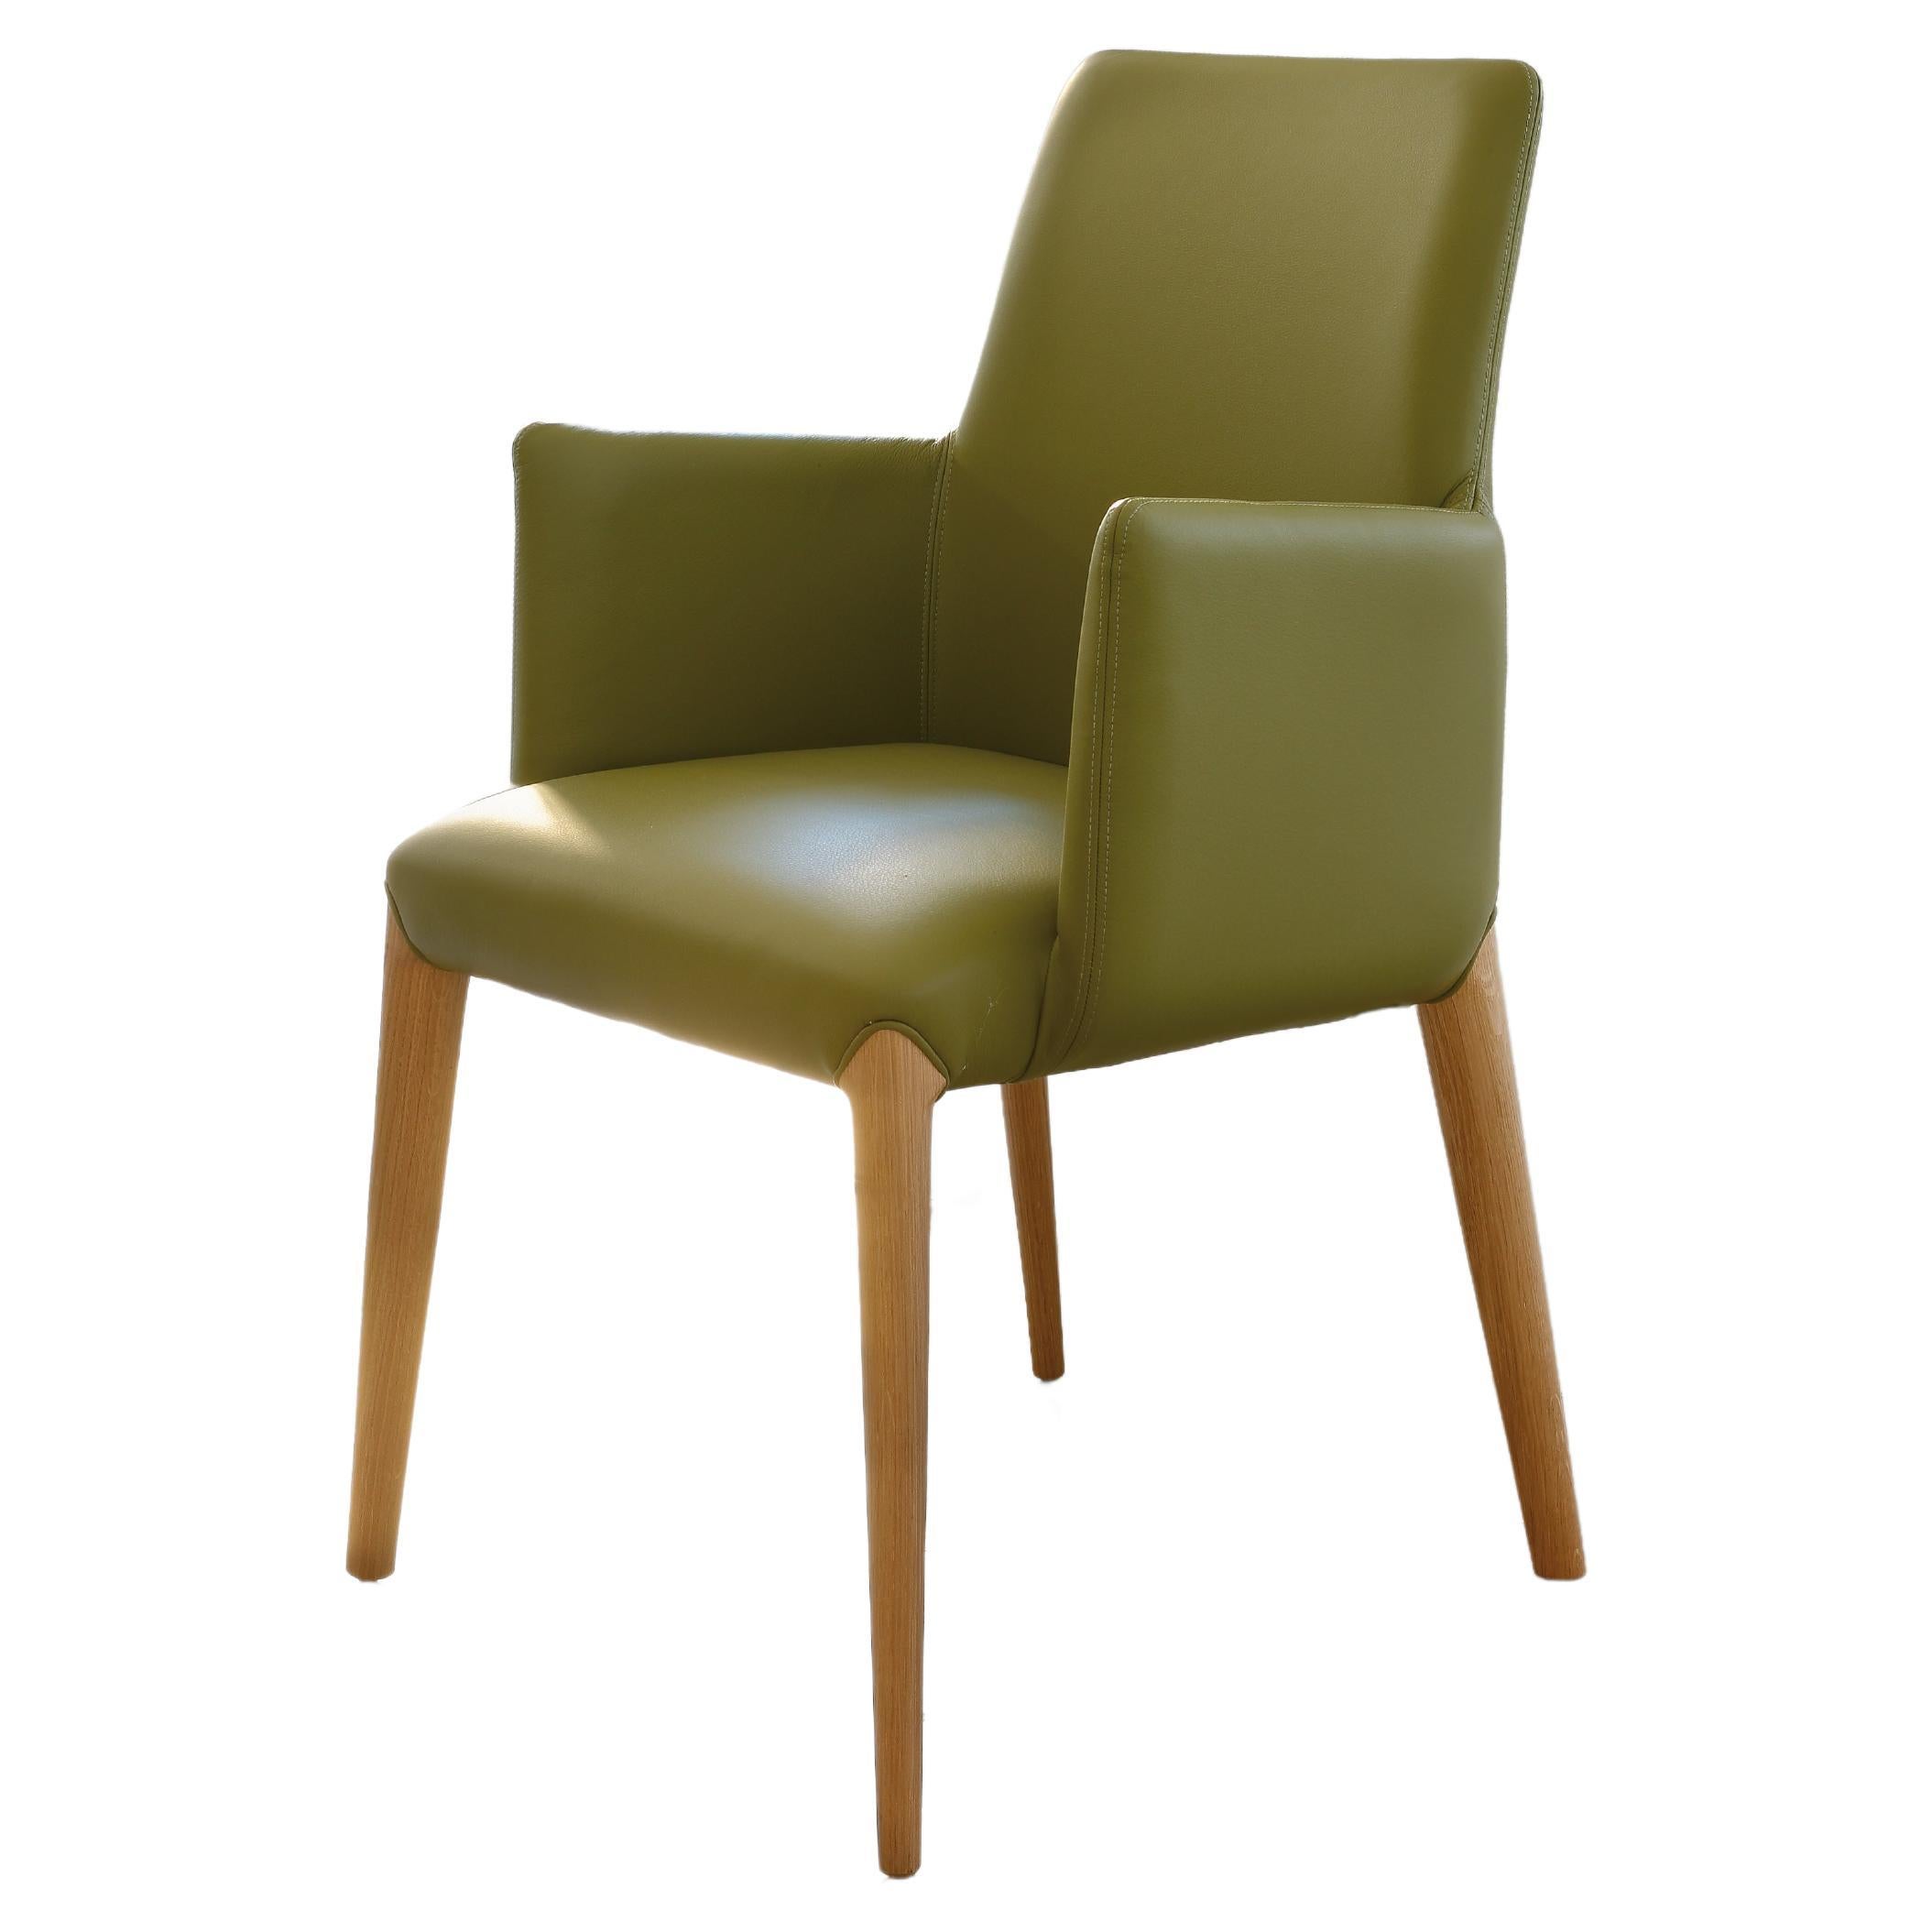 armchair art. Ines in green leather for living room or restaurant, confortable 